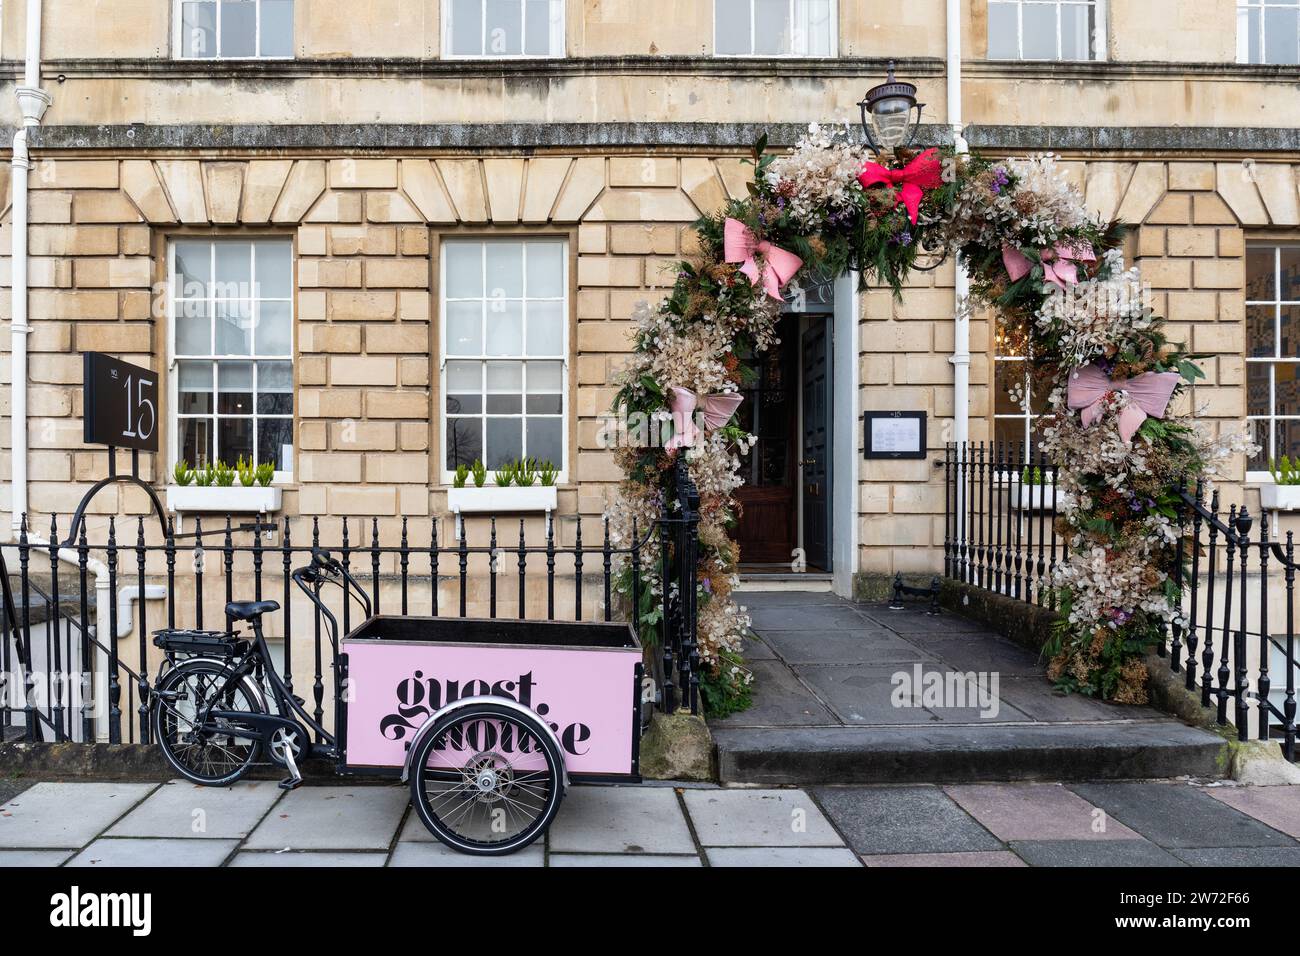 No.15 Great Pulteney Street Boutique Hotel & Spa decorated for Christmas, Great Pulteney Street, Bath, Somerset, England, UK Stock Photo